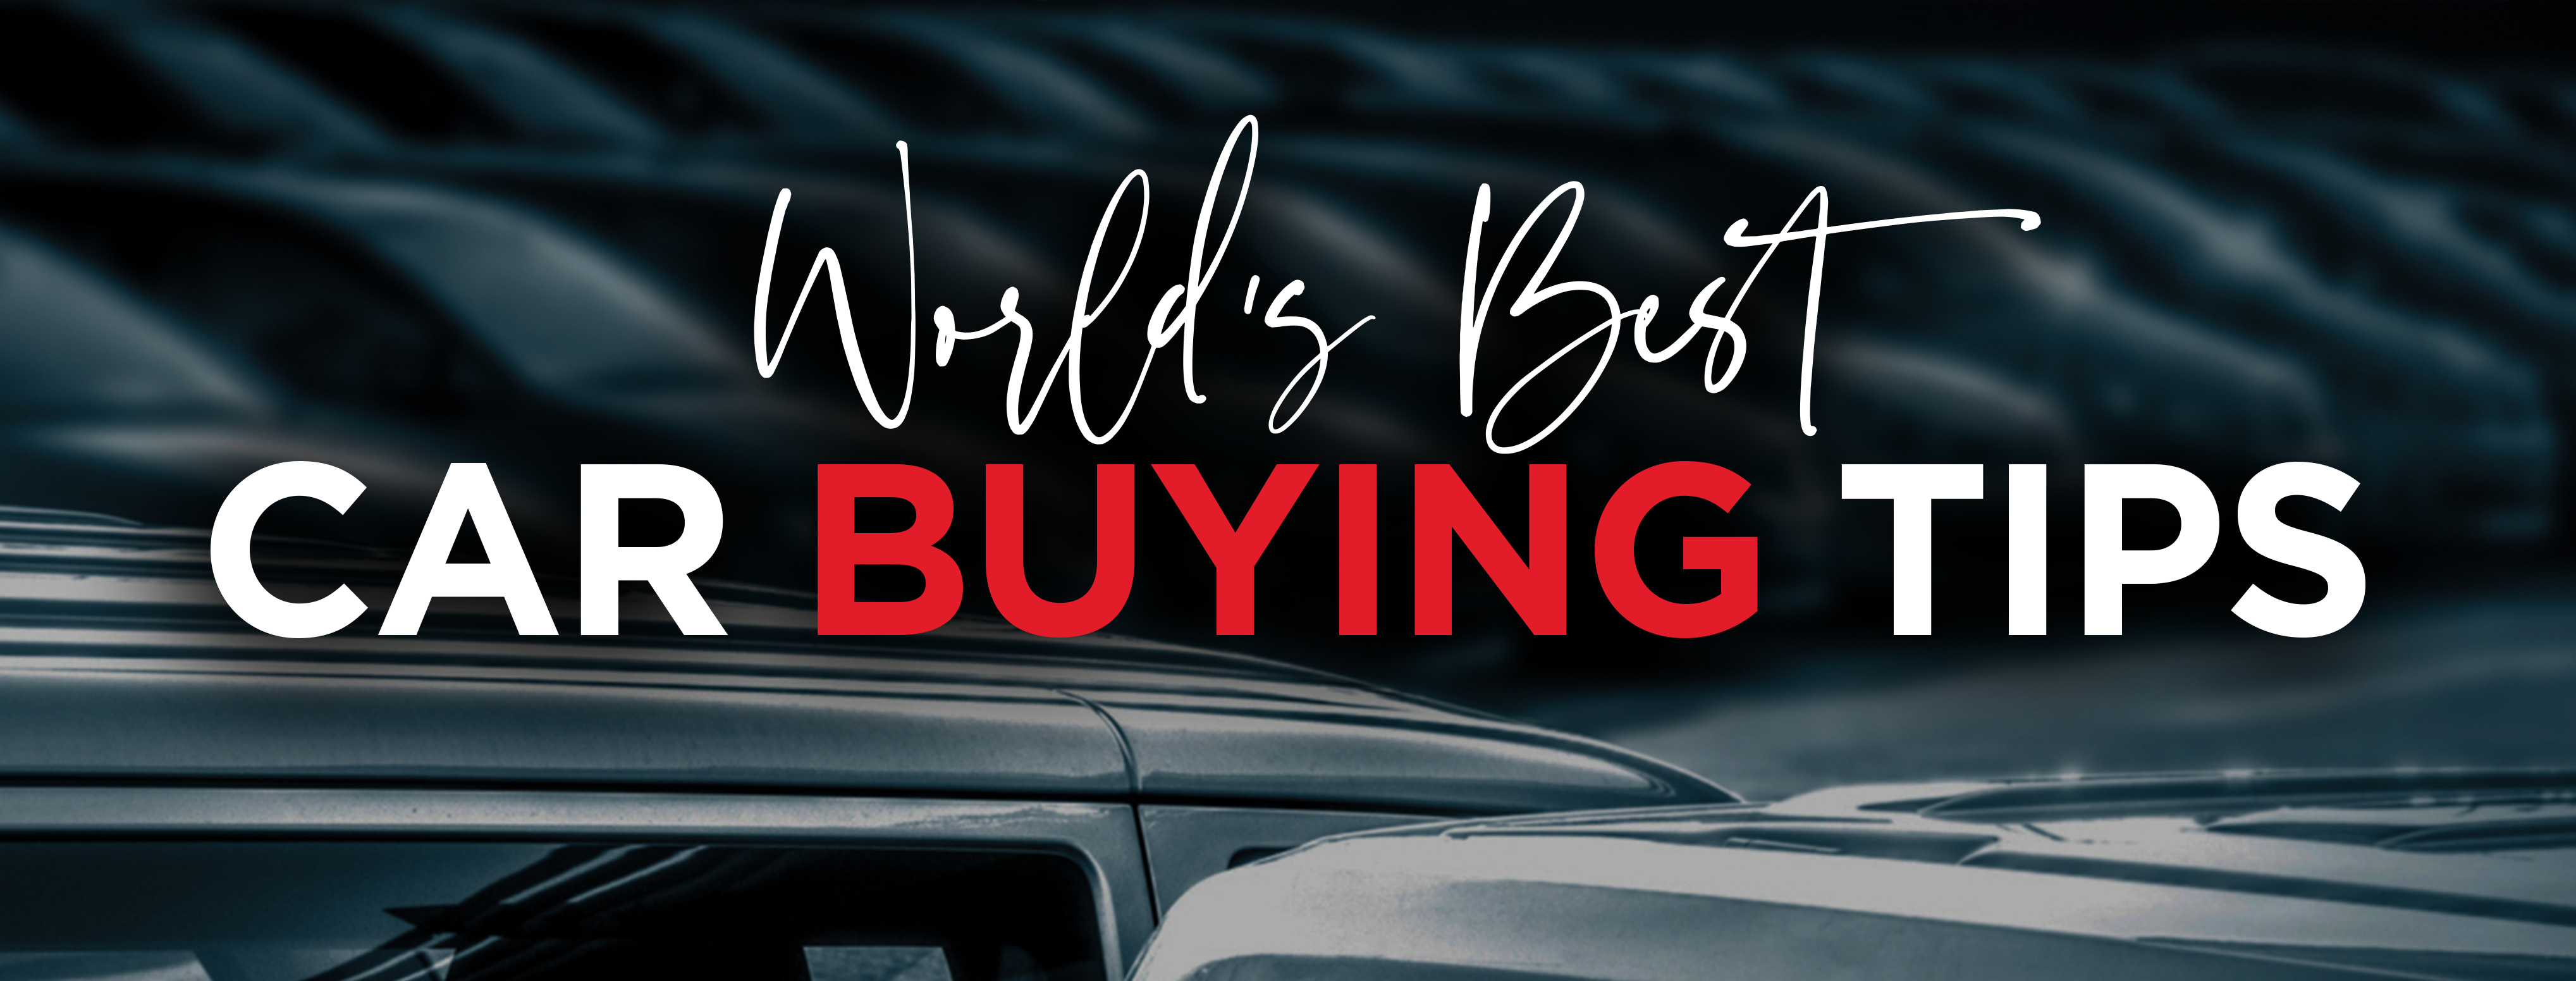 World’s Best Car Buying Tips